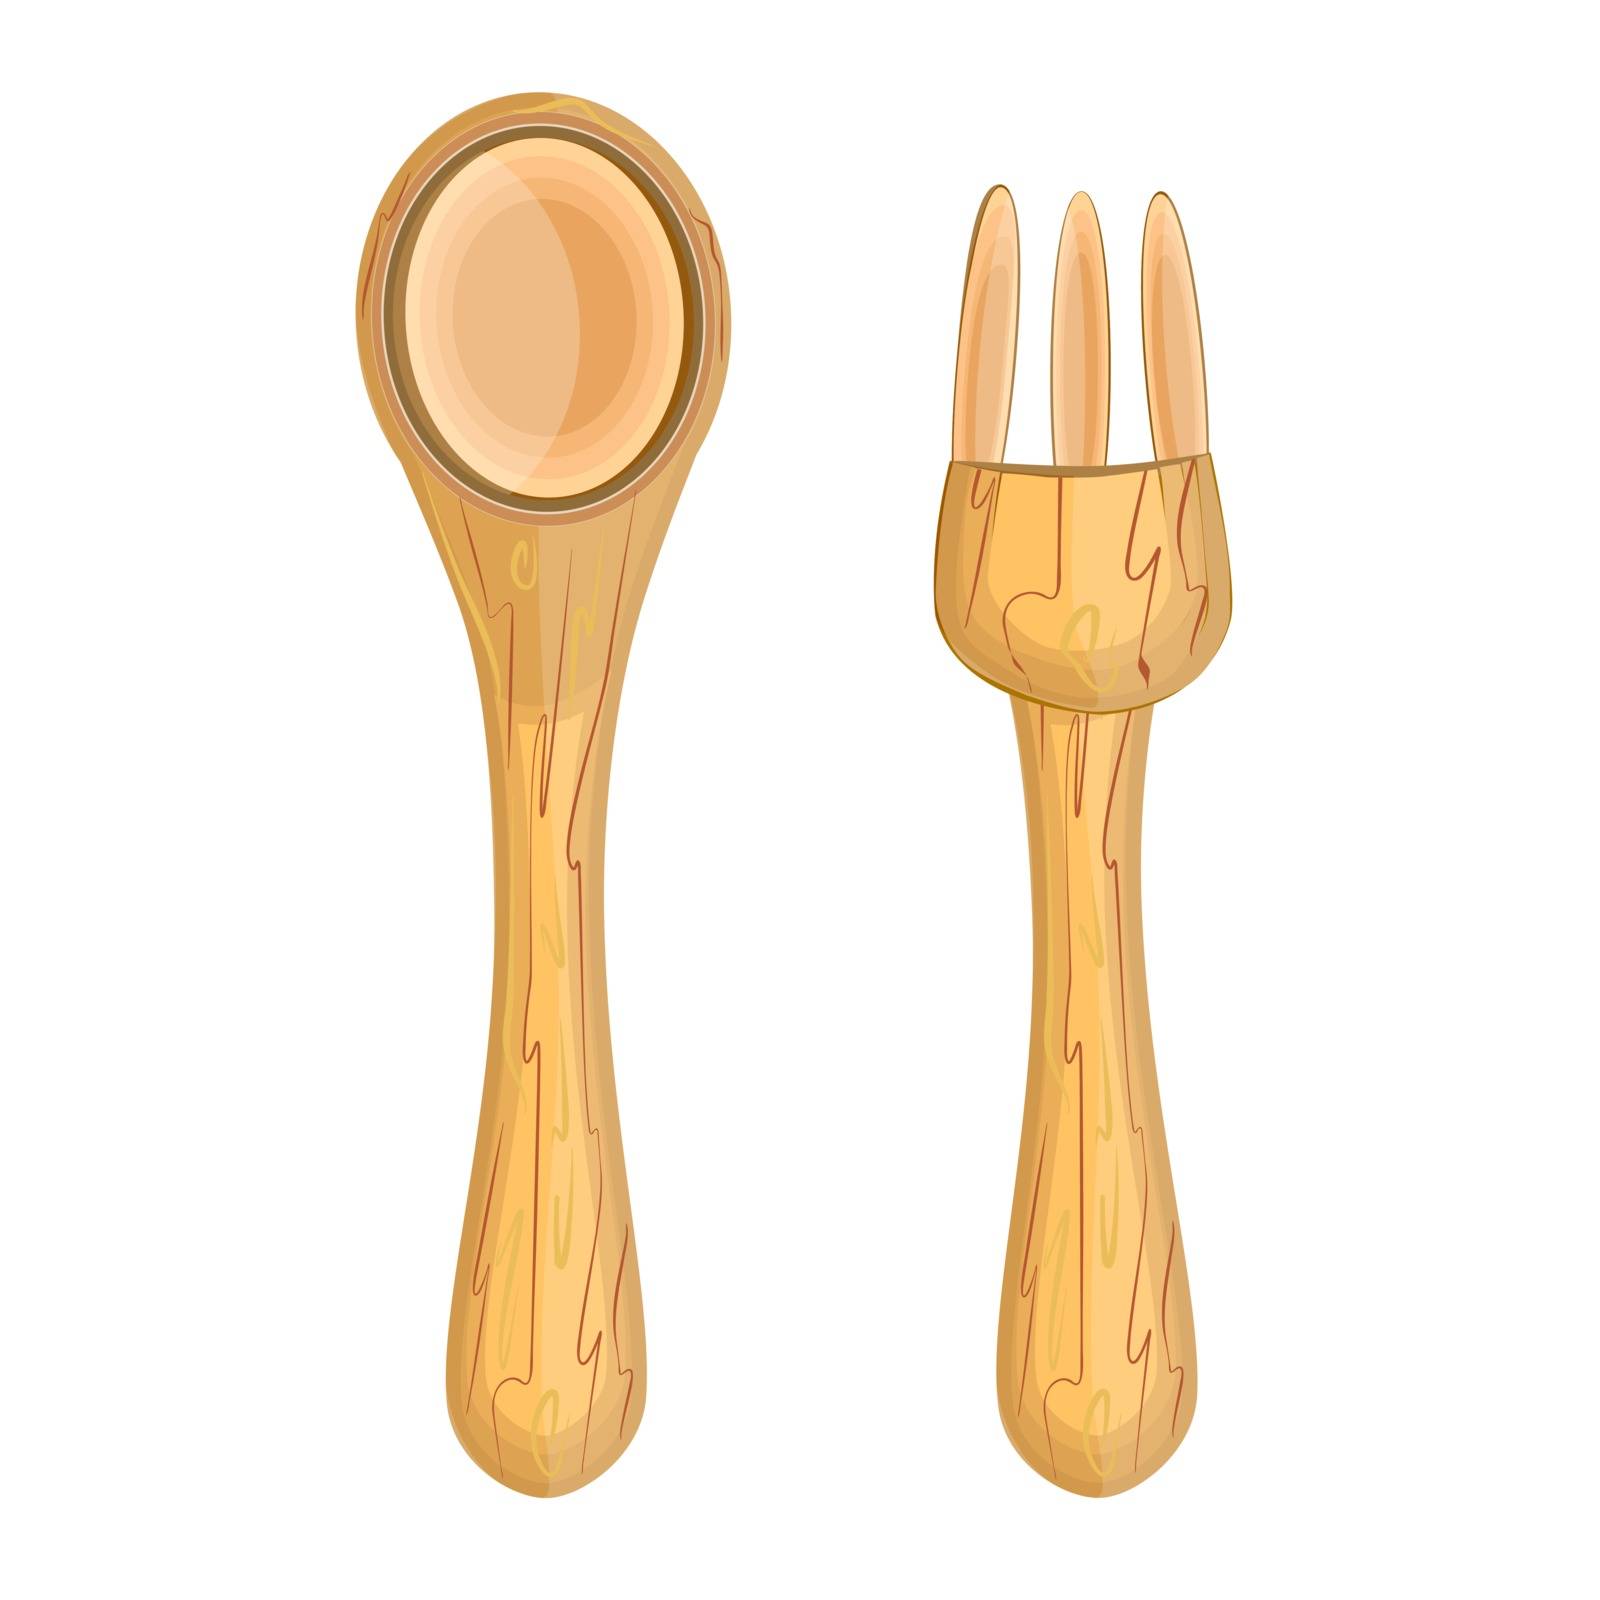 Wooden pair of fork and spoon isolated on white background. by KajaNi